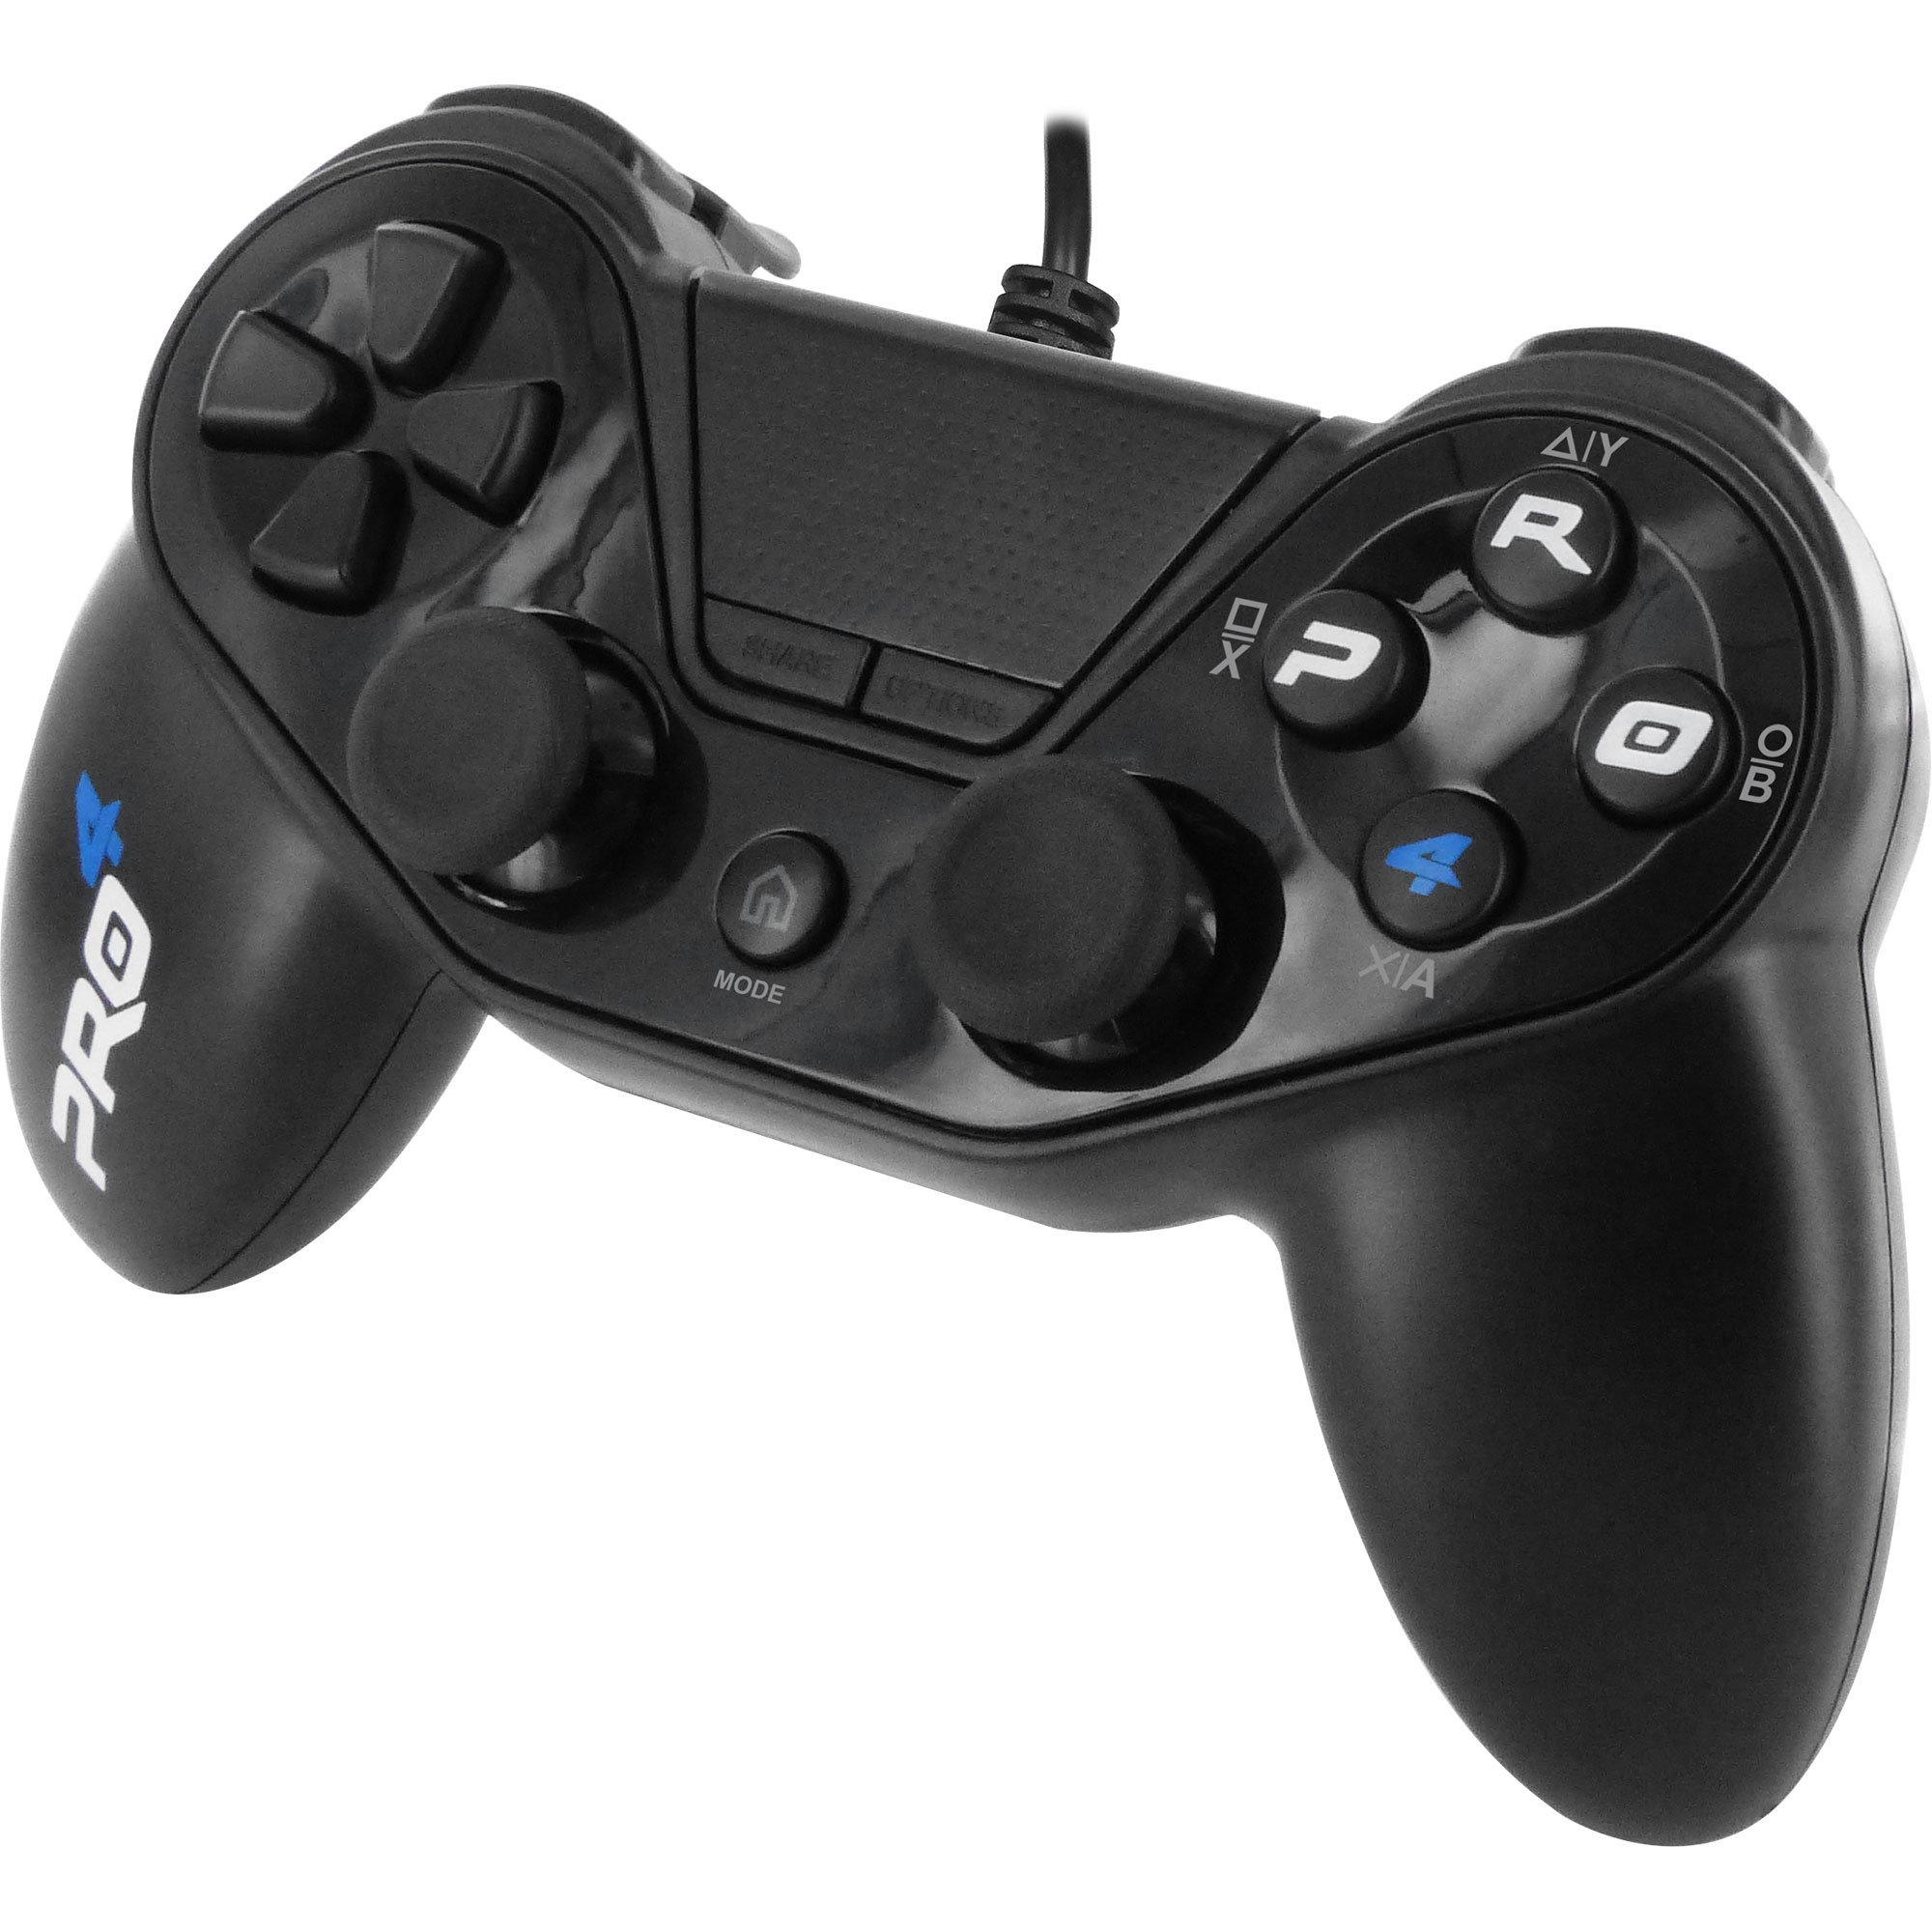 Manette ps3 non offi + cable